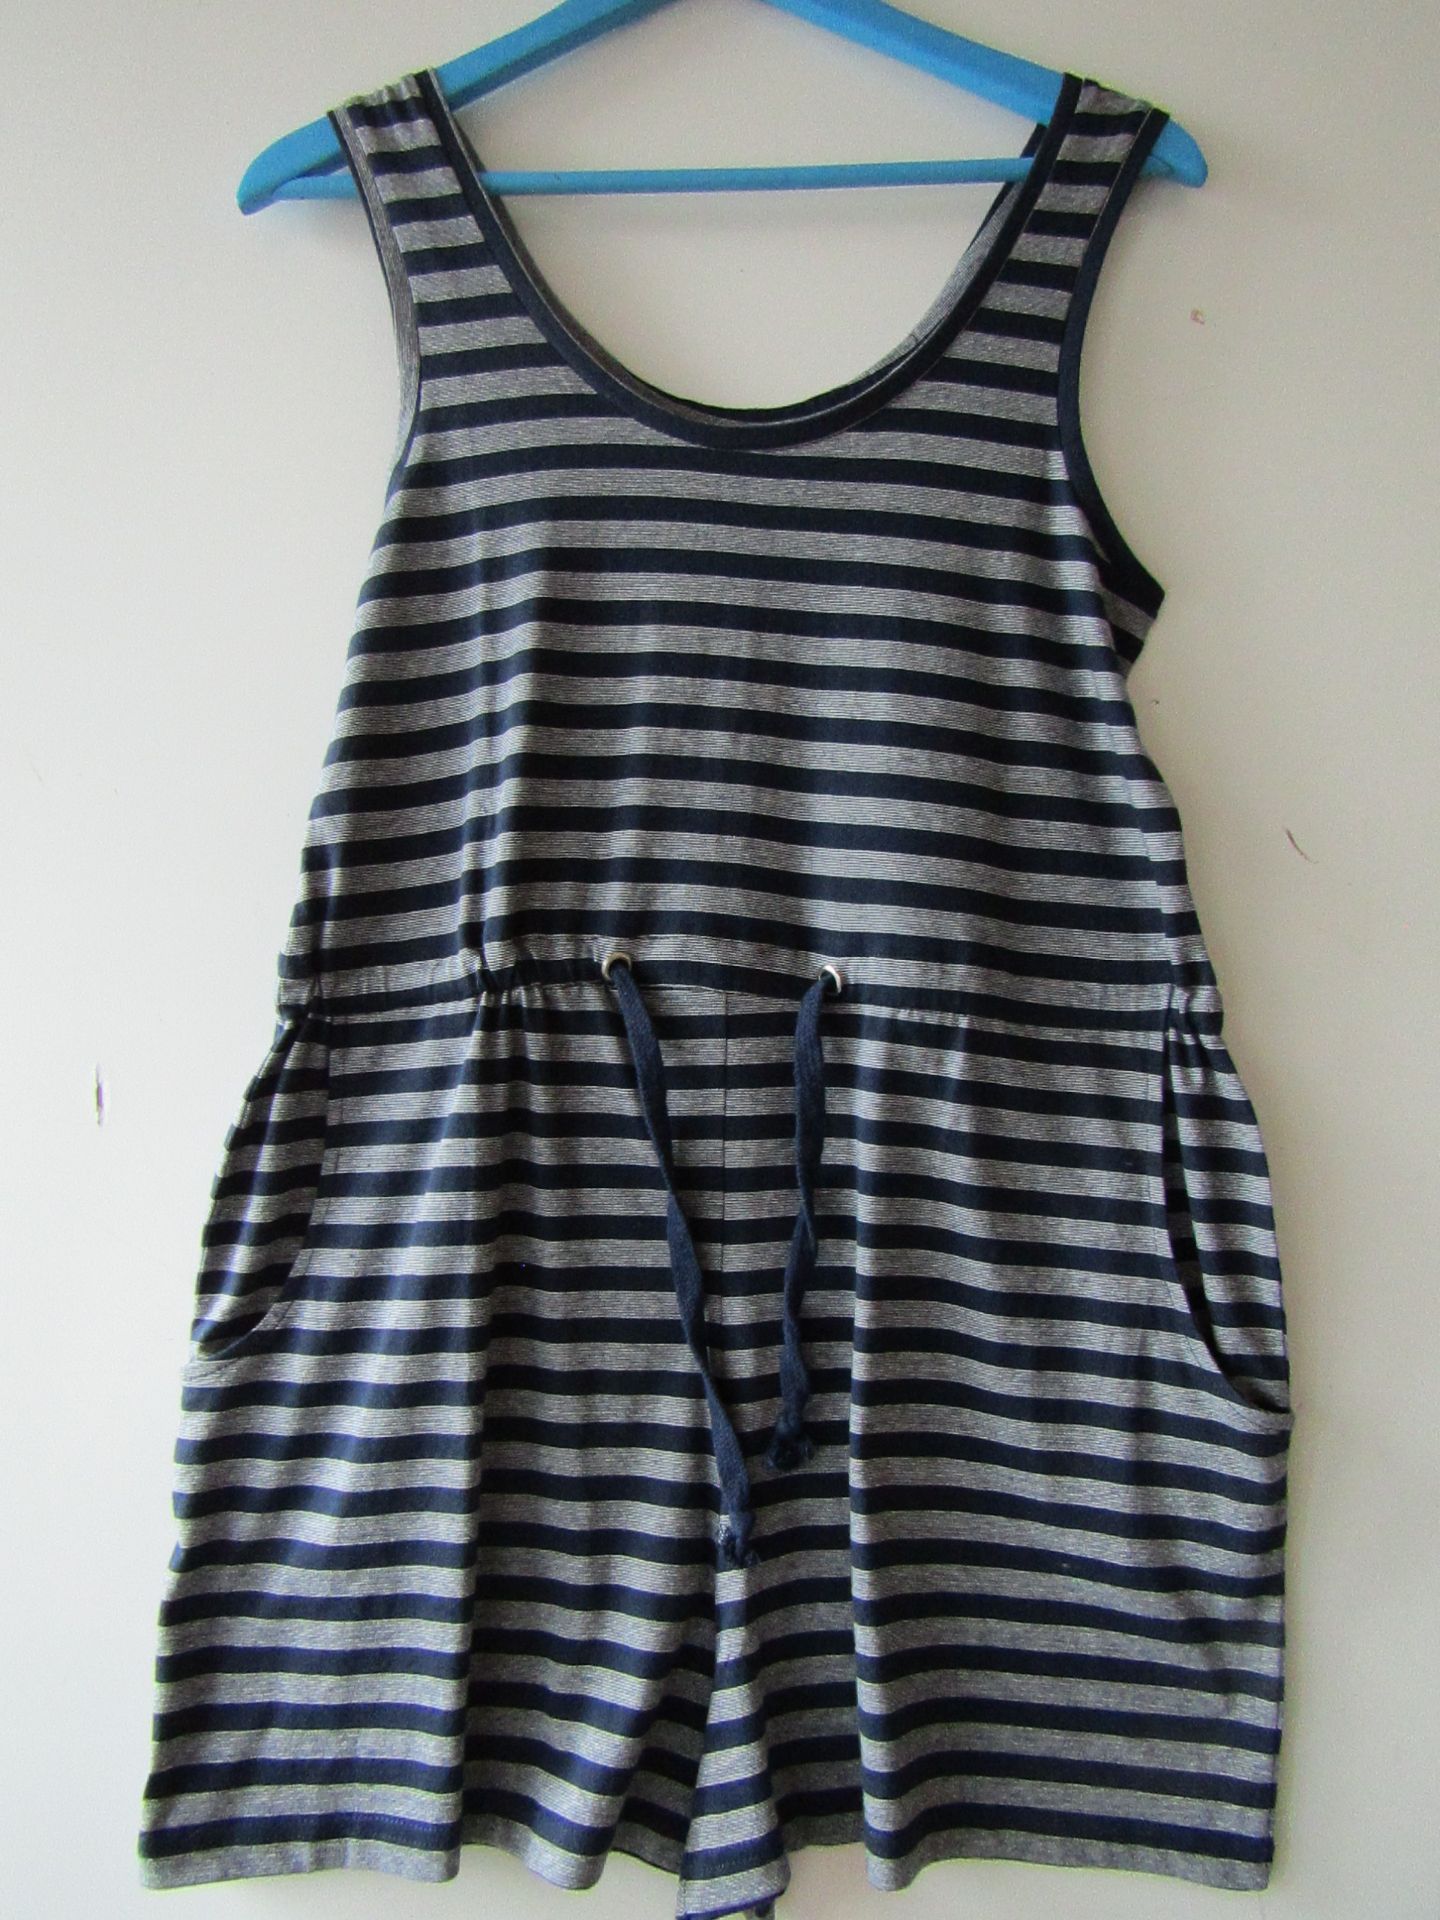 Ladies Brave Soul Striped Play suit. New Sample. Size S